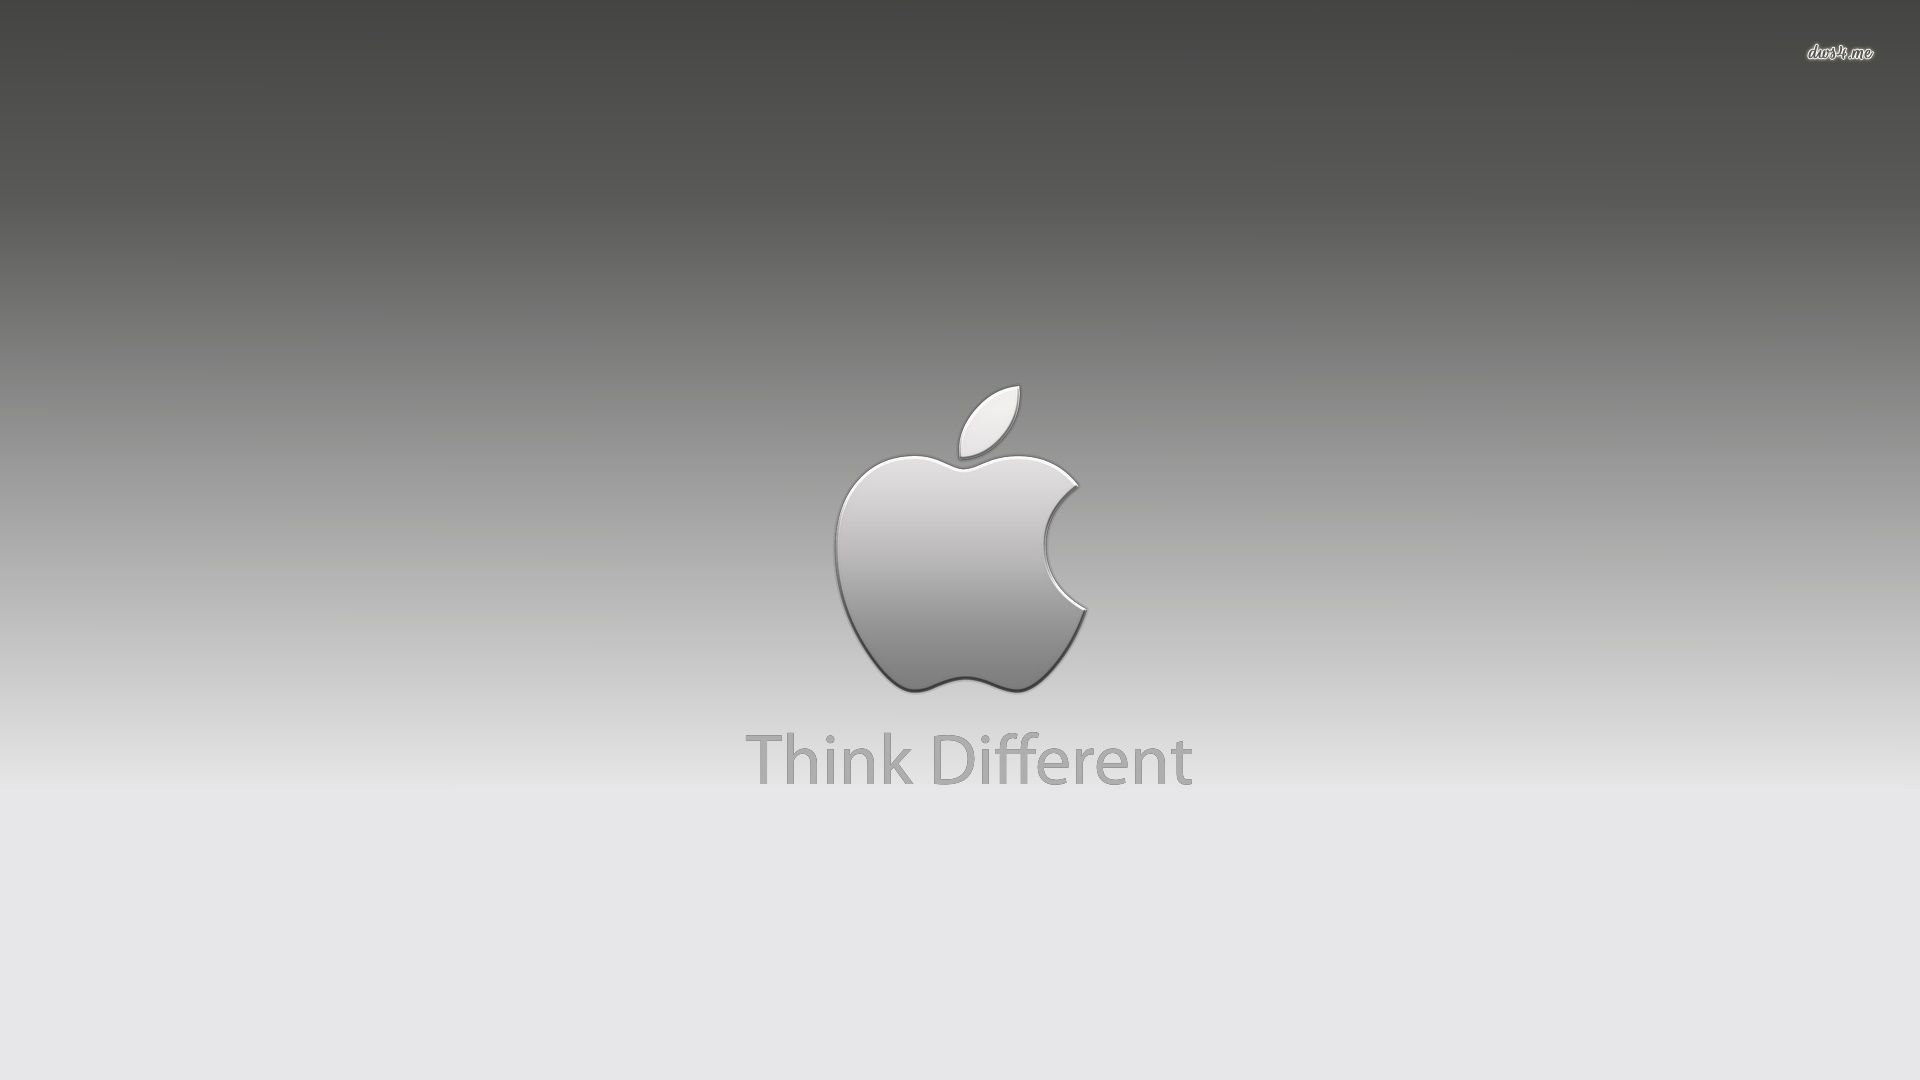 Think Different wallpaper - Computer wallpapers - #5770